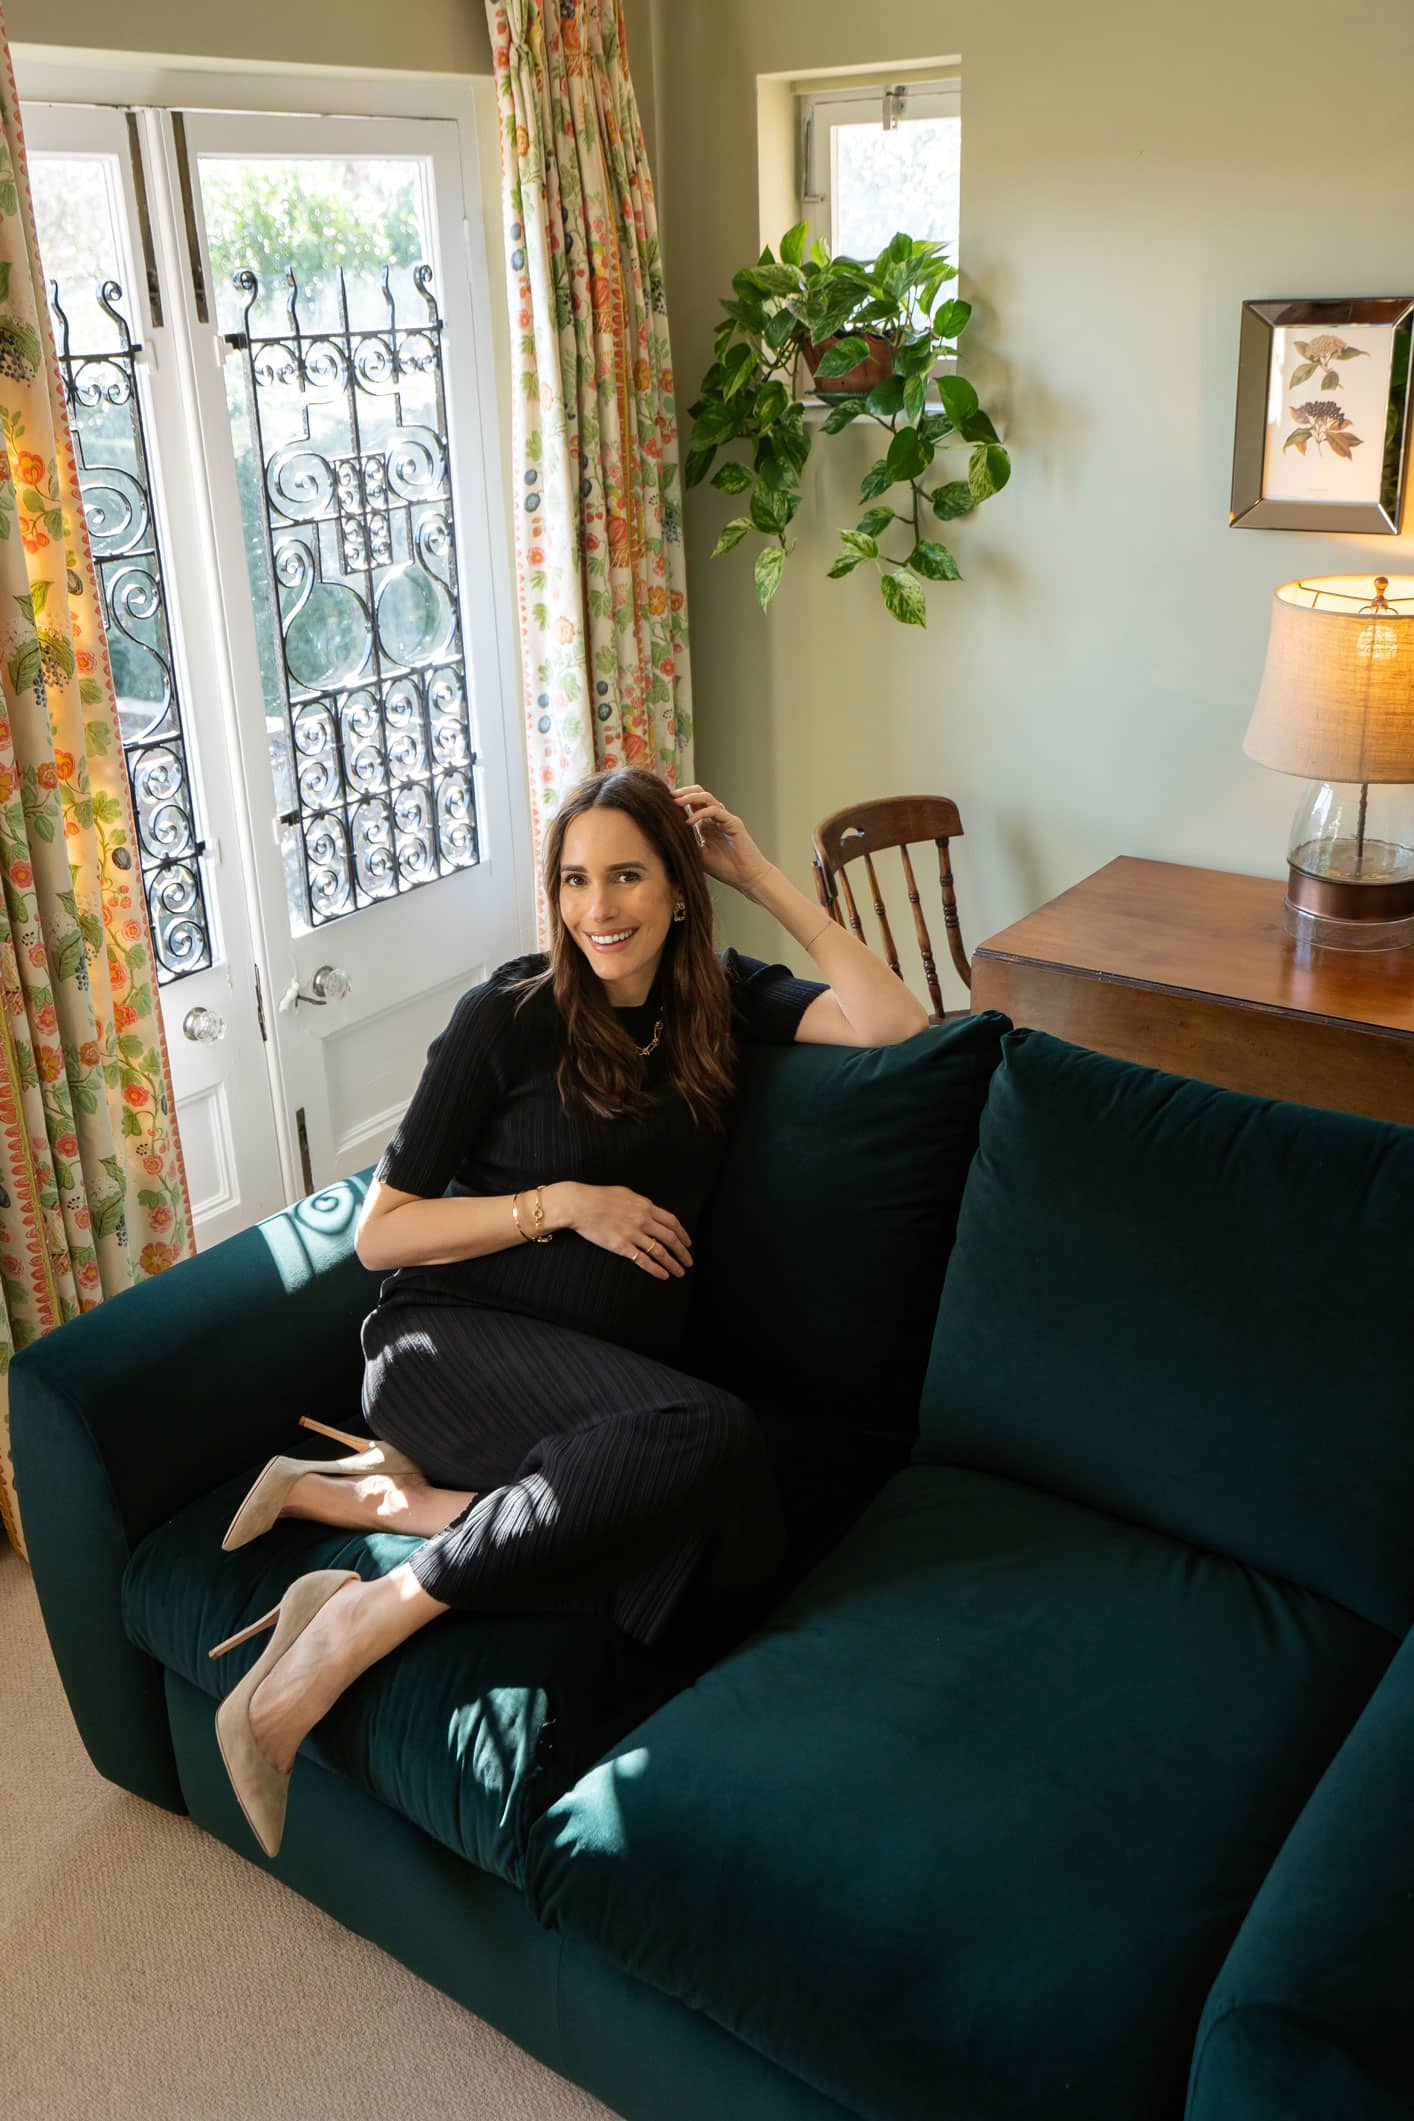 Louise Roe of Front Row reveals her coach house